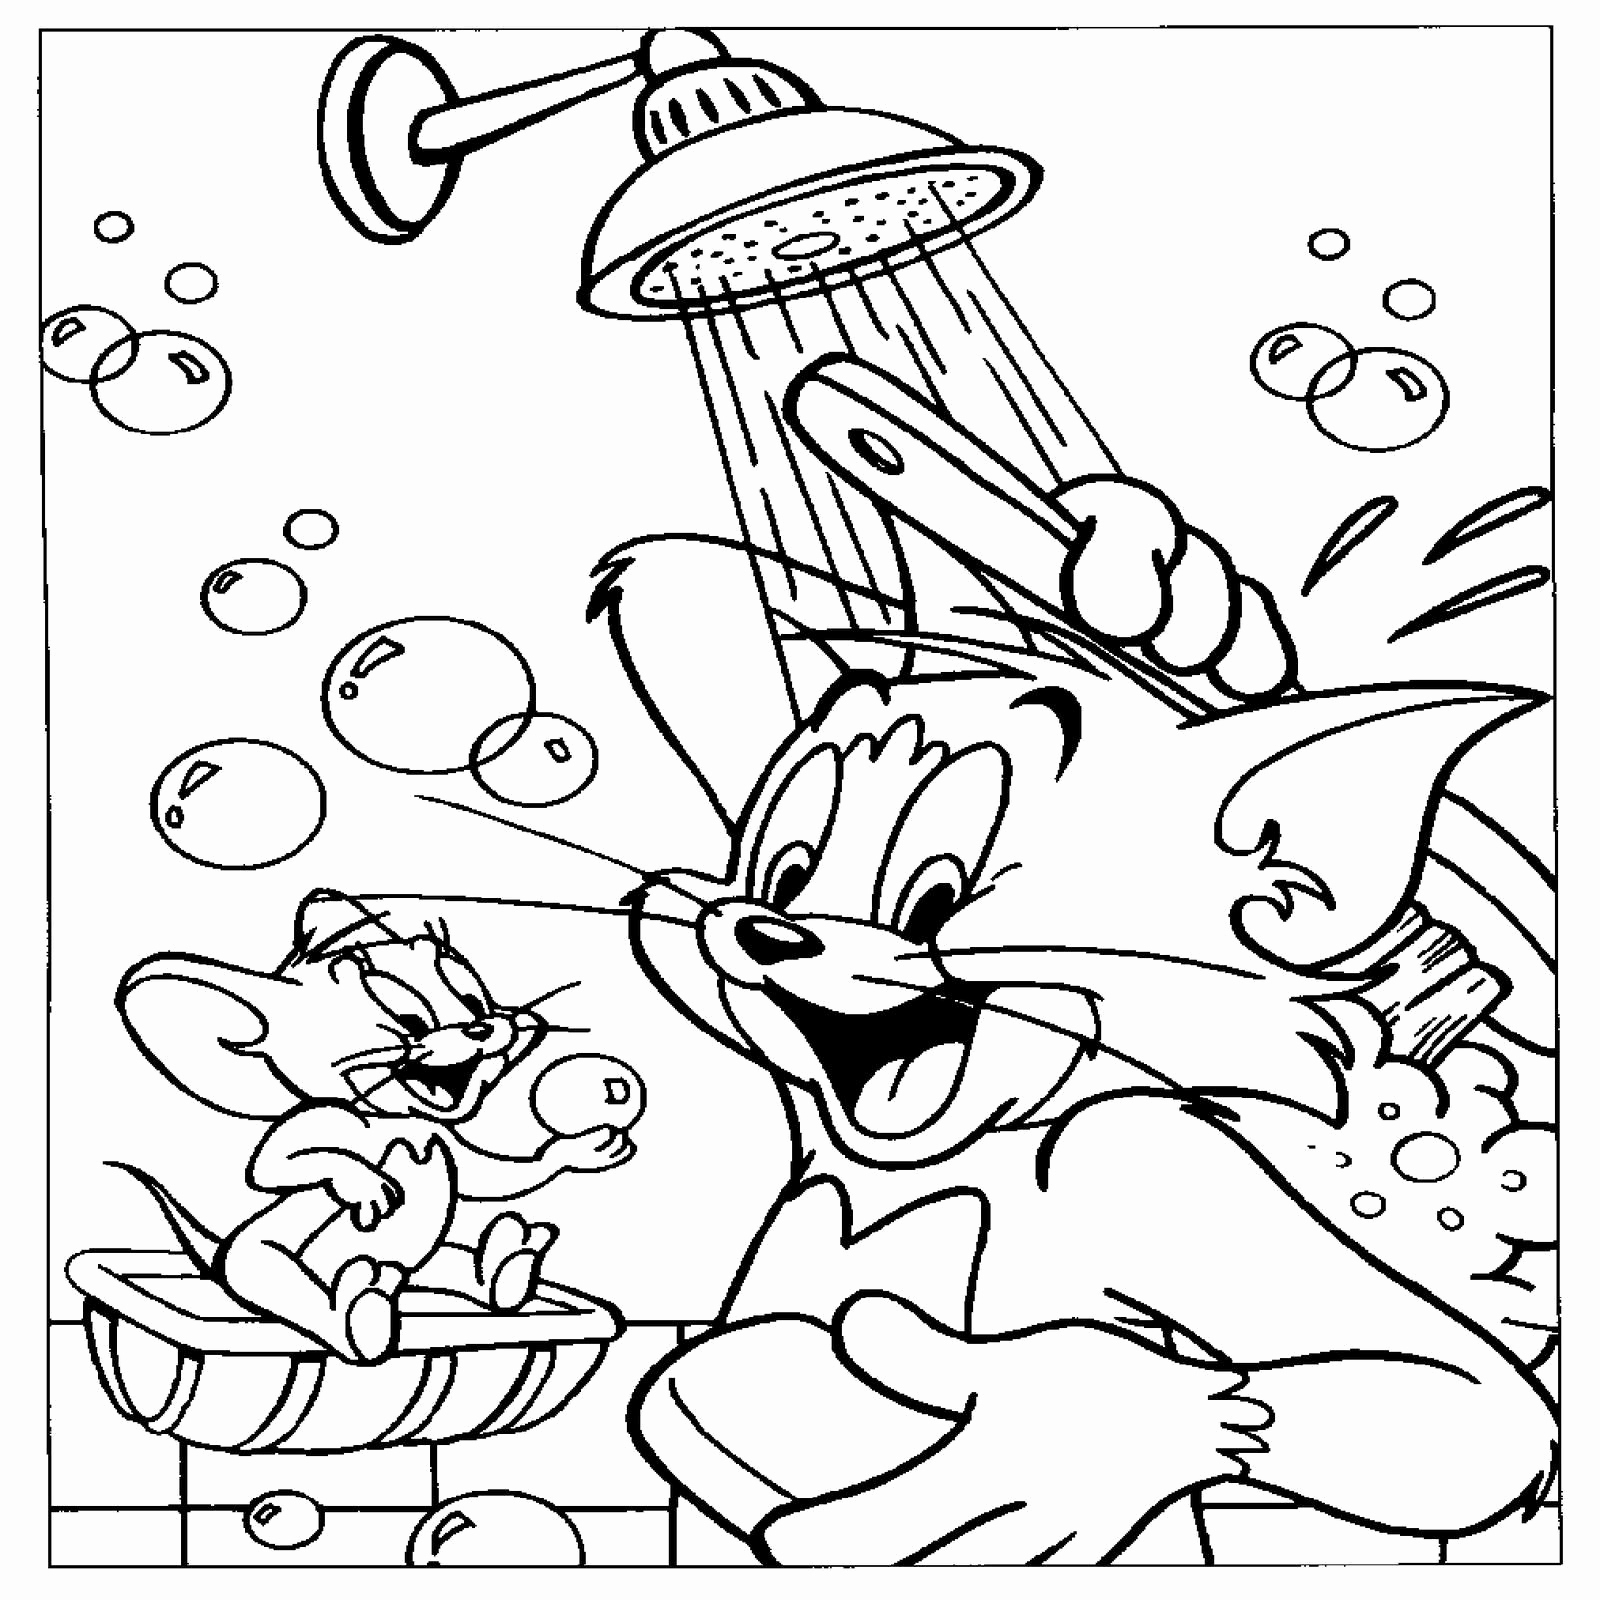 Coloring Pages : Tom And Jerry Coloring Pages For Kids Color Bing - Free Printable Tom And Jerry Coloring Pages